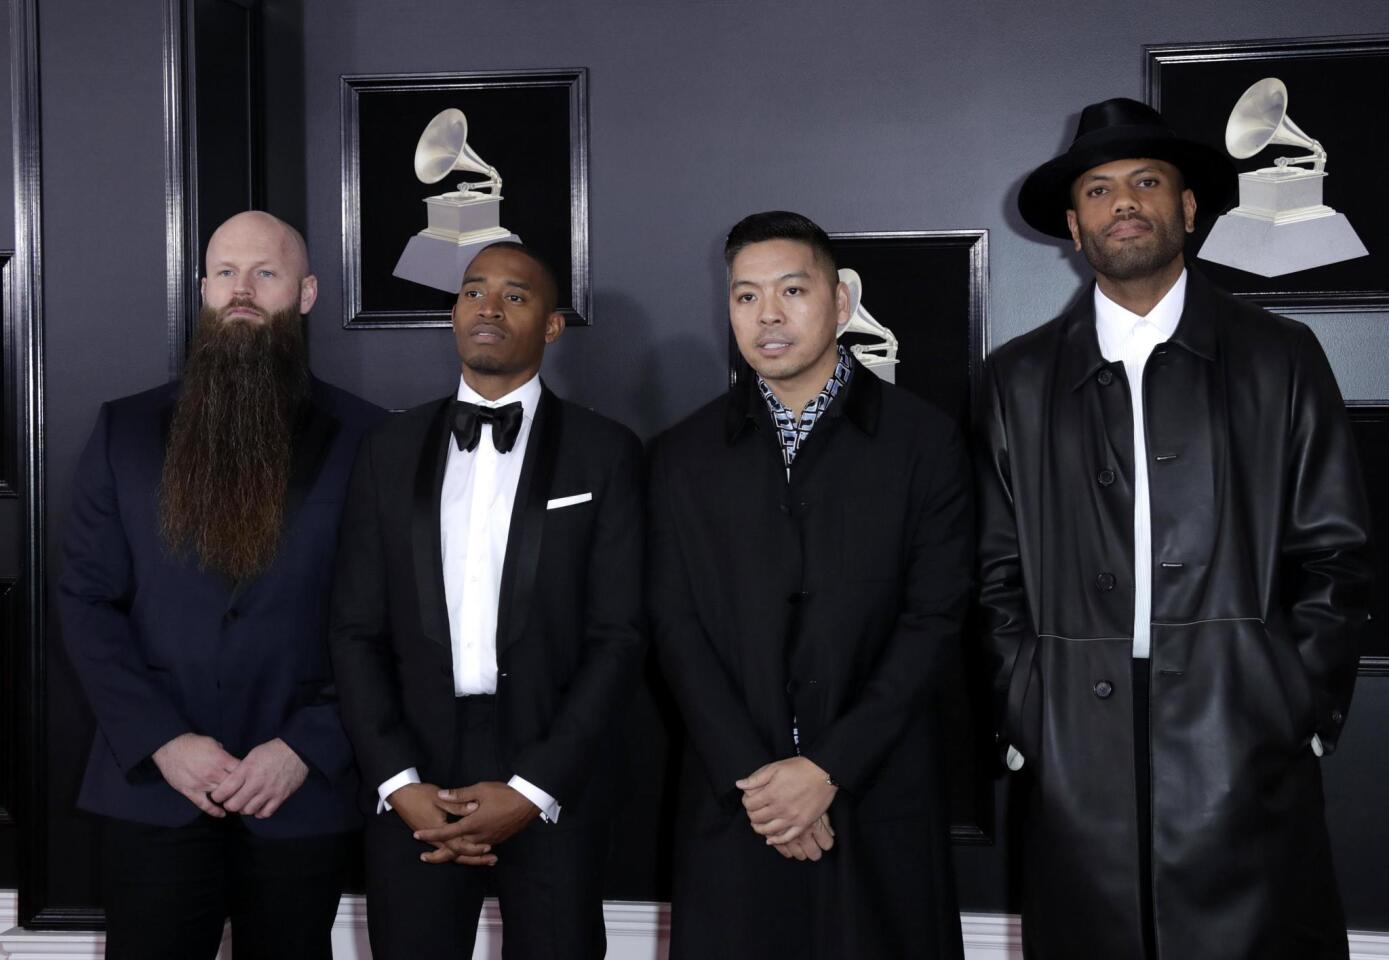 Arrivals - 60th Annual Grammy Awards